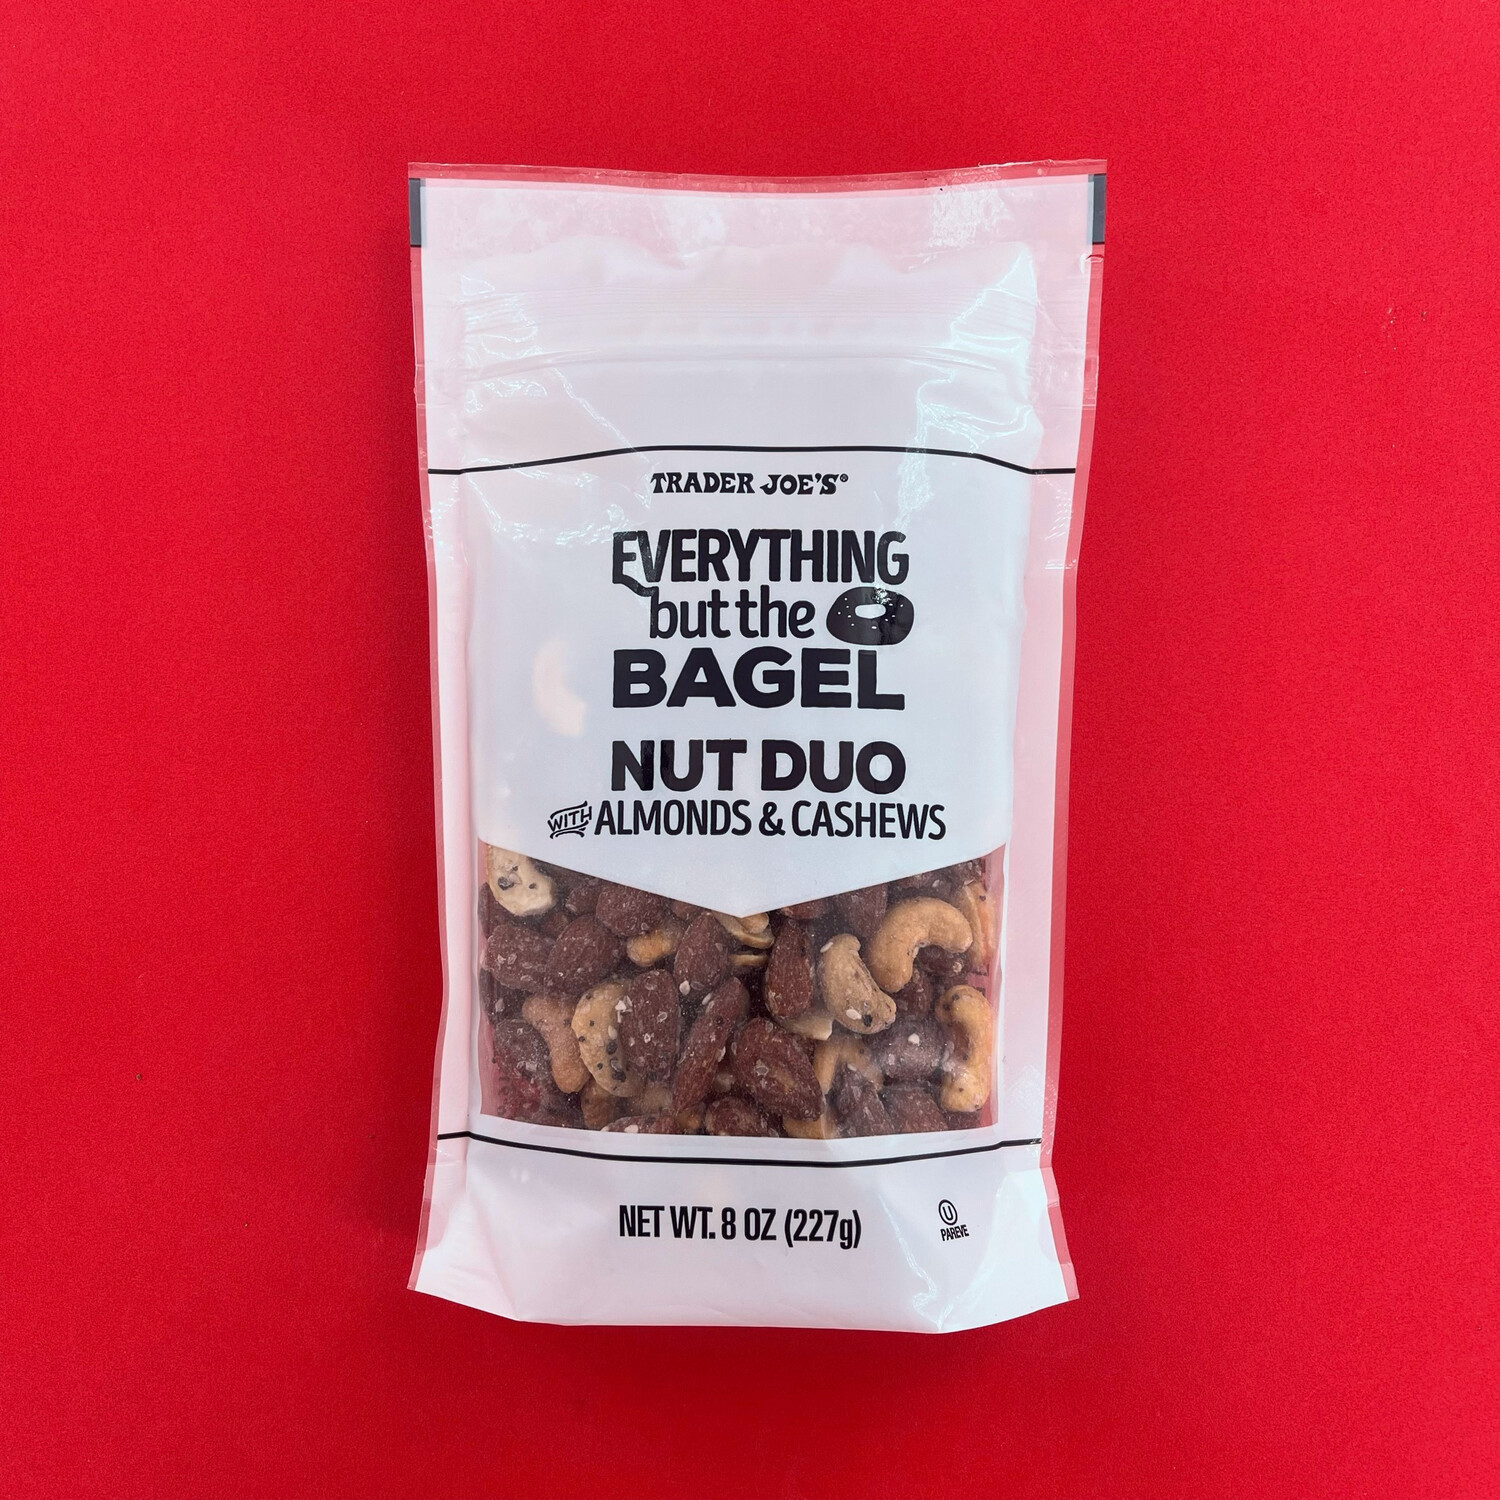 Trader Joe's Everything but the Bagel Nut Duo Almonds & Cashews